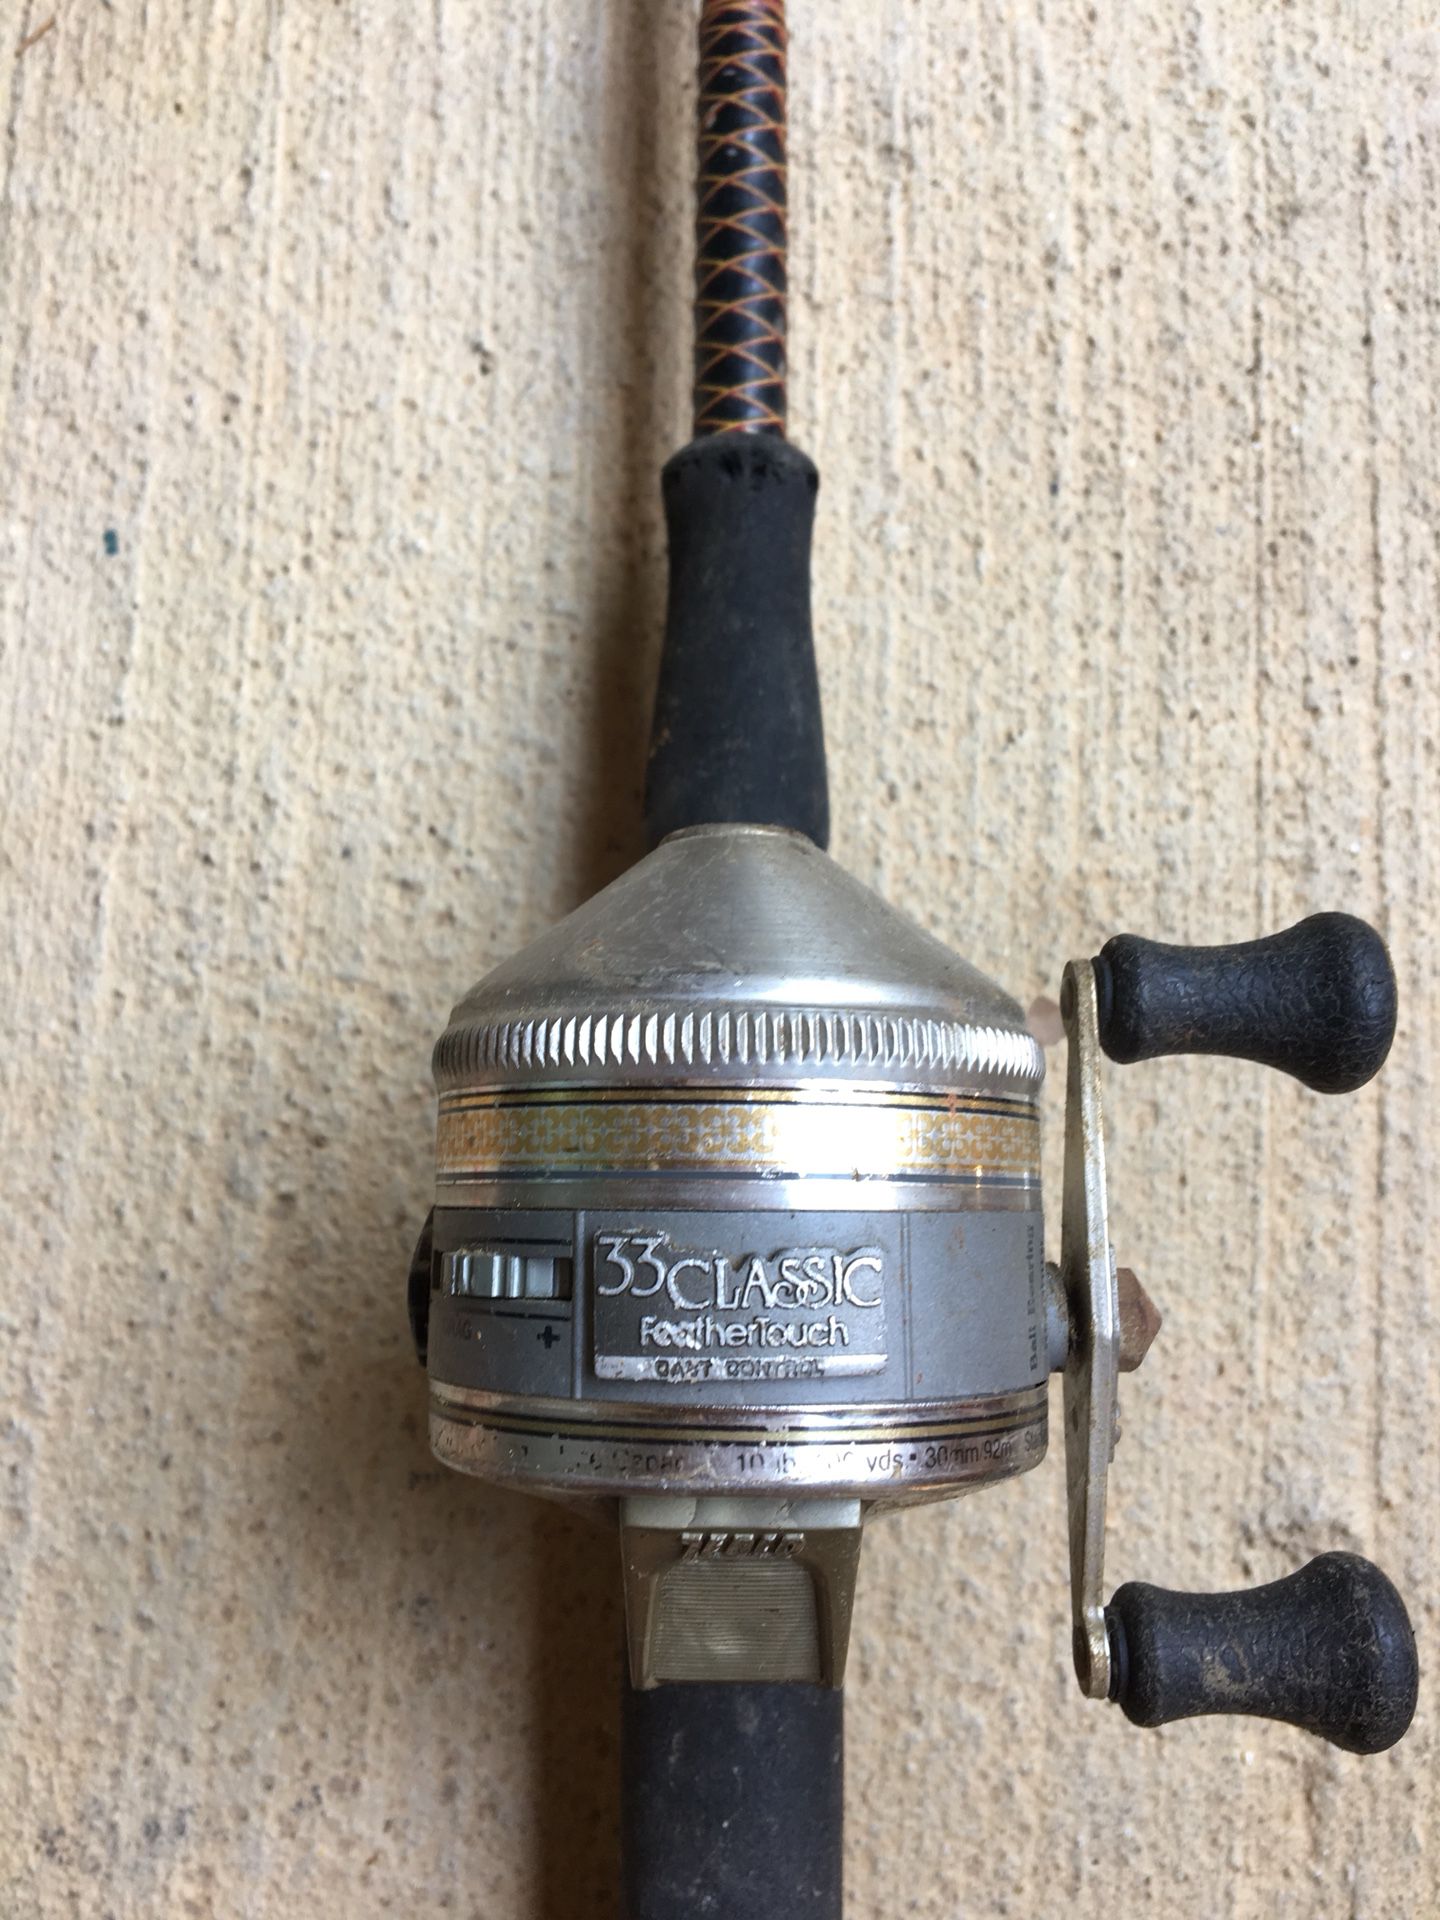 Zebco graphite composite rod with vintage Zebco 33 reel for Sale in Euless,  TX - OfferUp